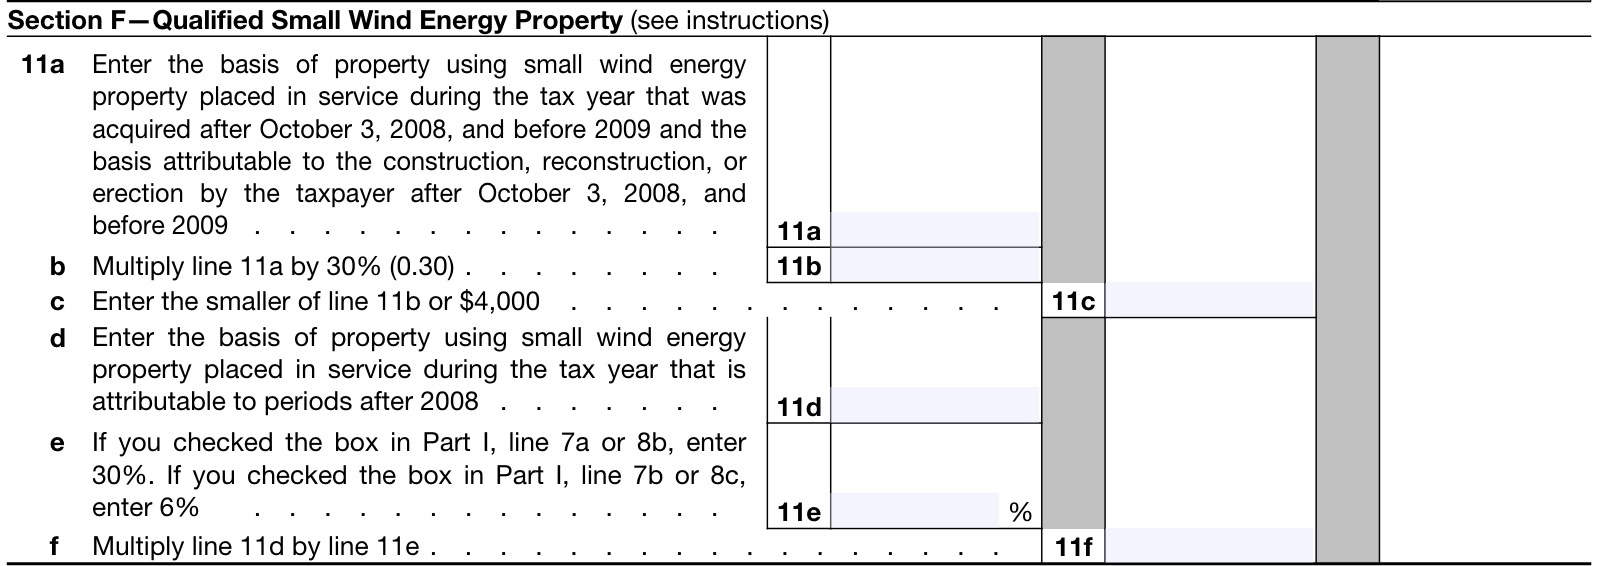 irs form 3468, part vi, section f: qualified small wind energy property